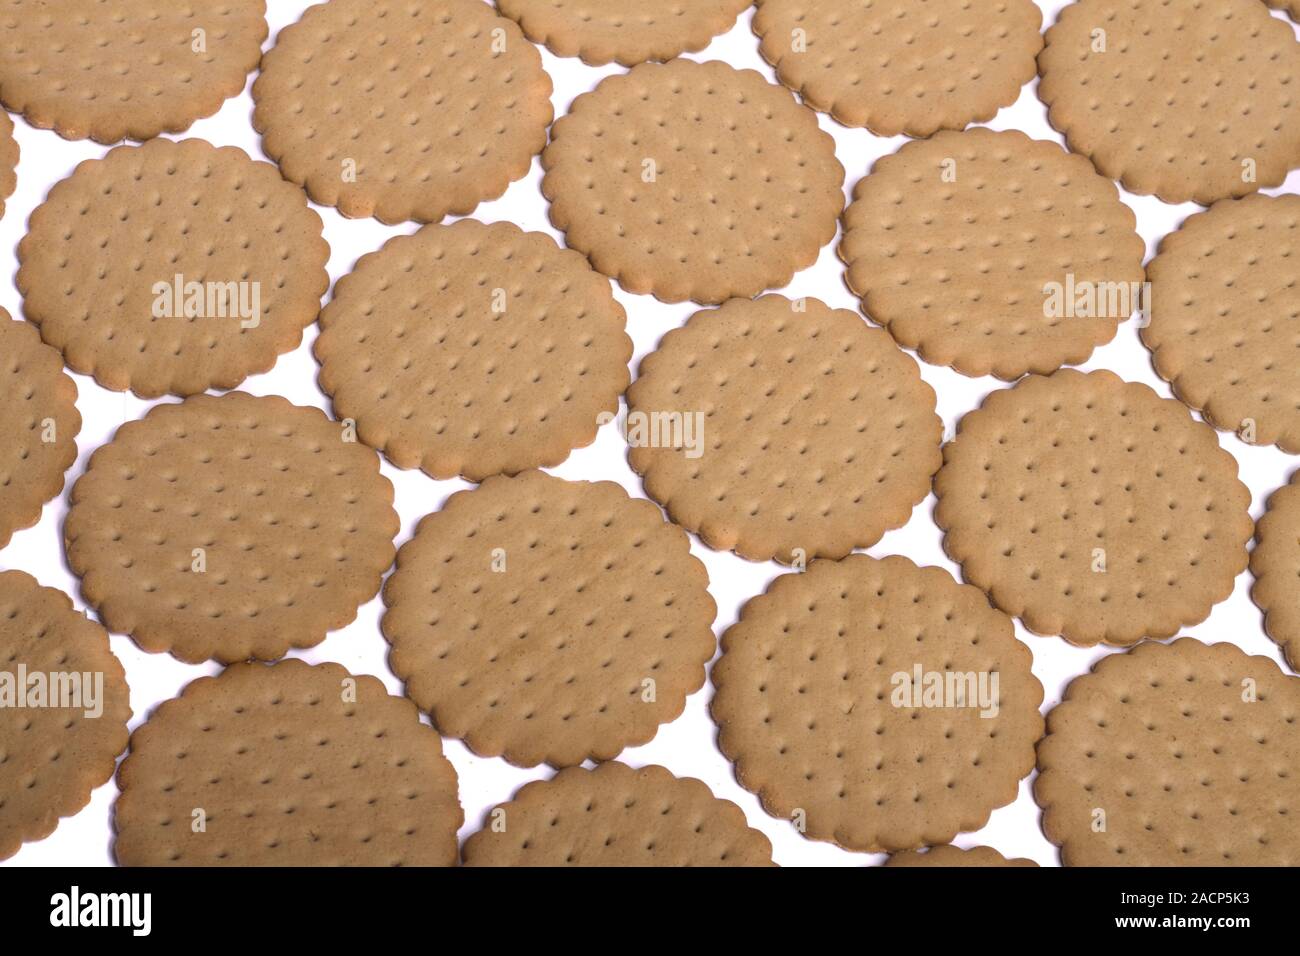 many biscuits Stock Photo